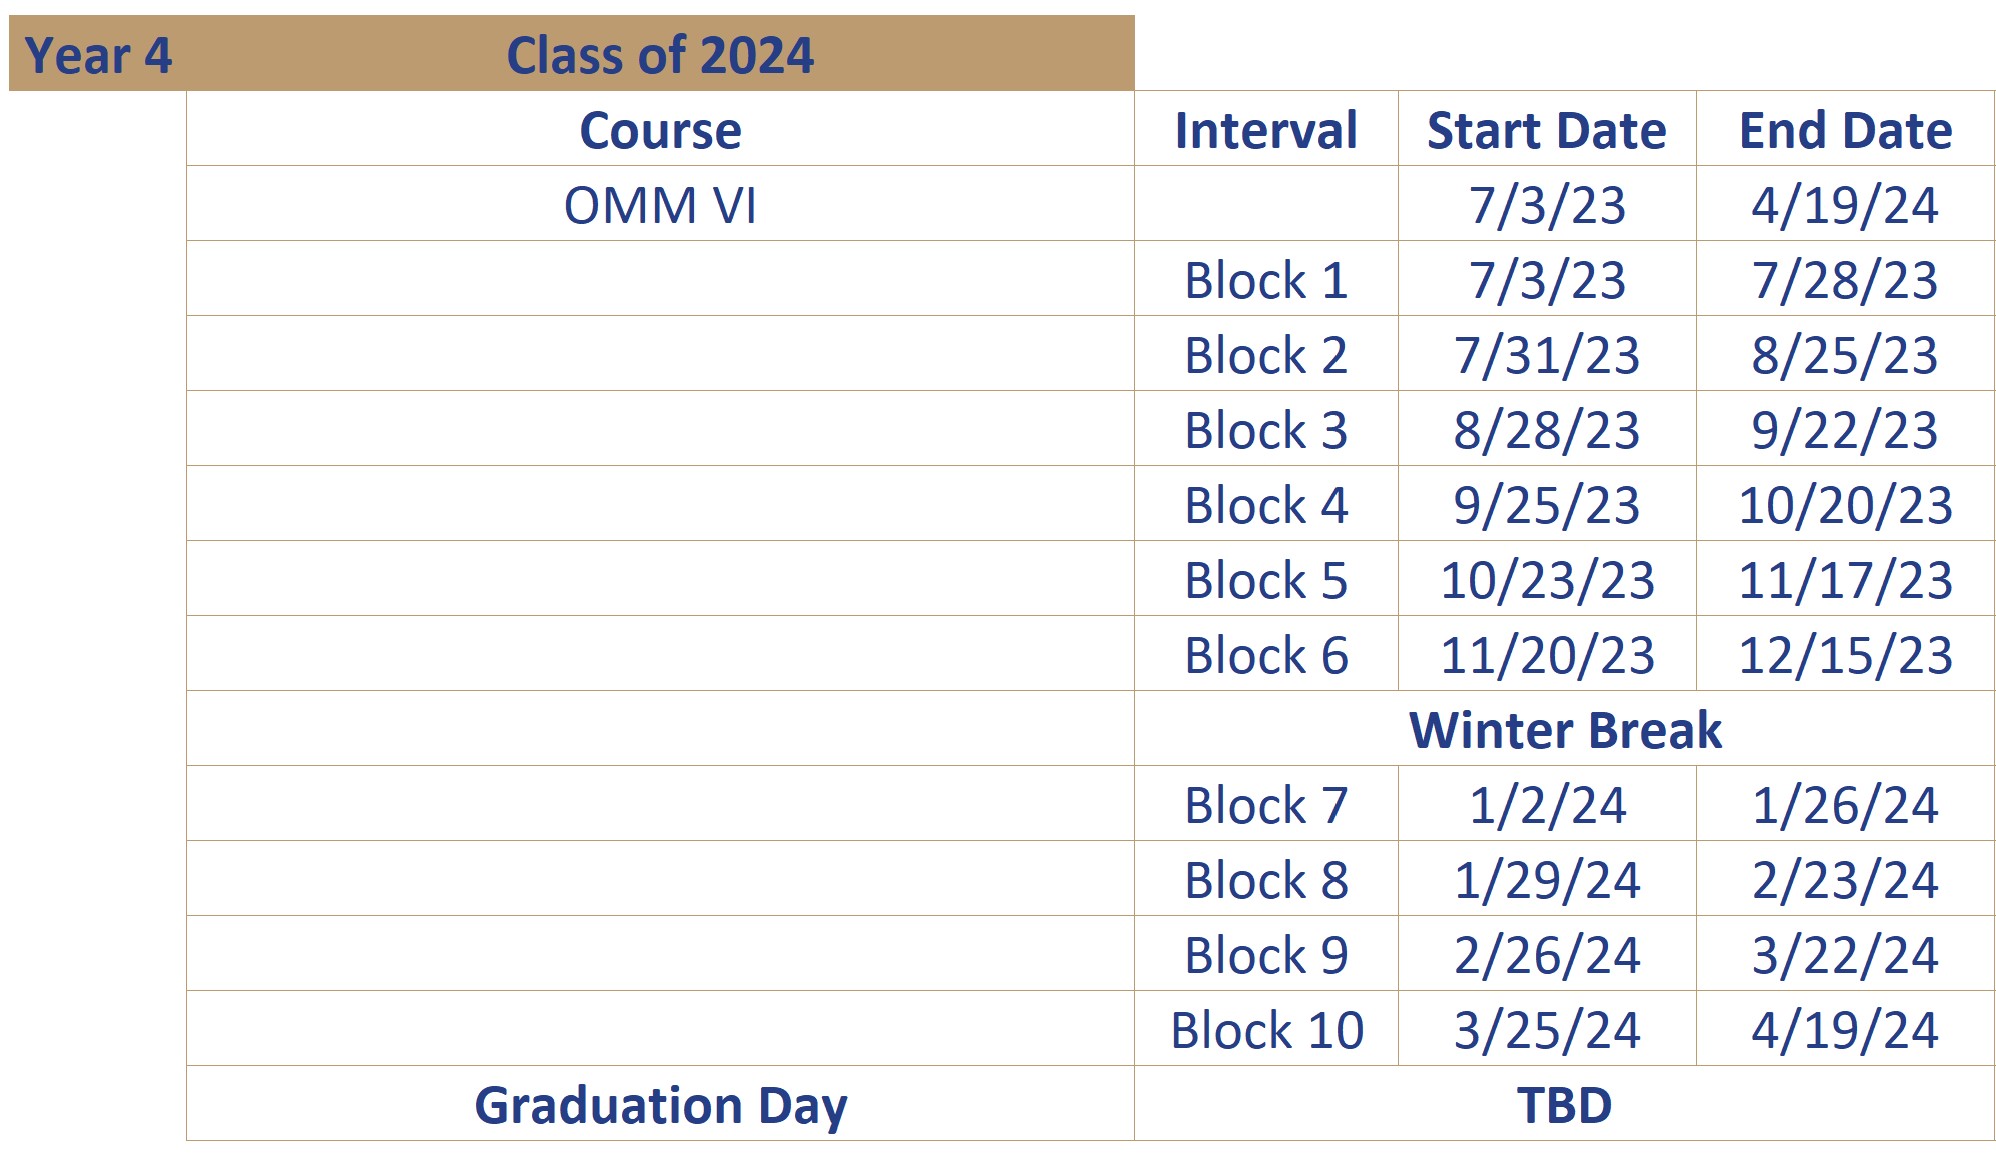 Year 4 Class of 2024 Course Interval Start Date End Date OMM VI 7/3/23 4/19/24 Block 1 7/3/23 7/28/23 Block 2 7/31/23 8/25/23 Block 3 8/28/23 9/22/23 Block 4 9/25/23 10/20/23 Block 5 10/23/23 11/17/23 Block 6 11/20/23 12/15/23 Winter Break Block 7 1/2/24 1/26/24 Block 8 1/29/24 2/23/24 Block 9 2/26/24 3/22/24 Block 10 3/25/24 4/19/24 Graduation Day TBD